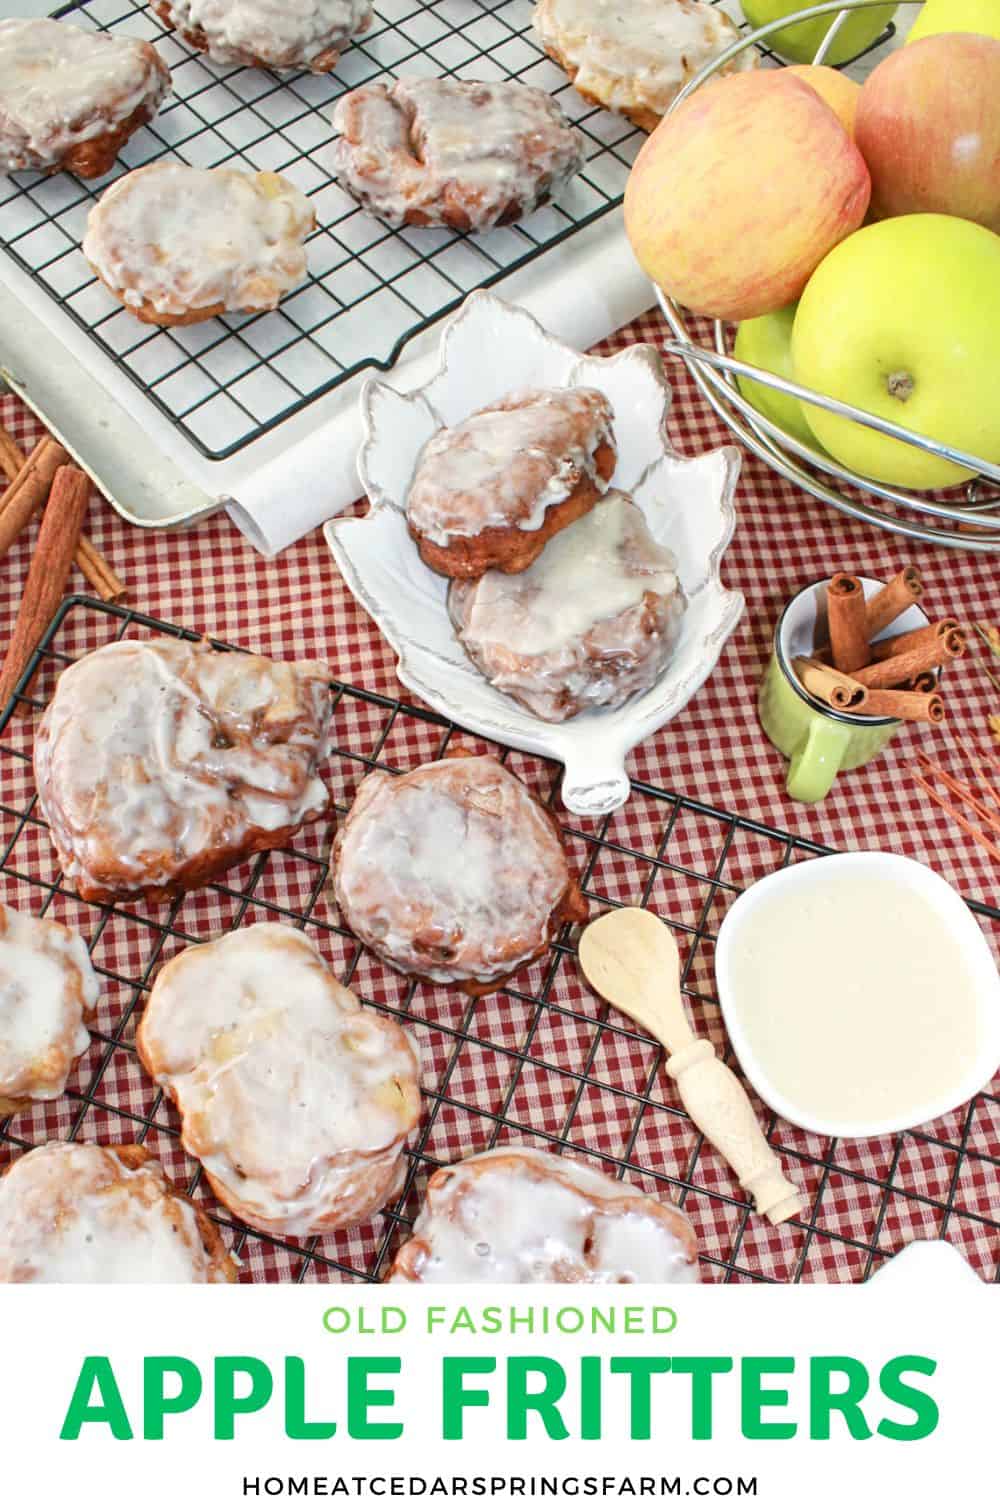 Old Fashioned Apple Fritters on a wire rack with whole apples and cinnamon sticks in the background, and text overlay.